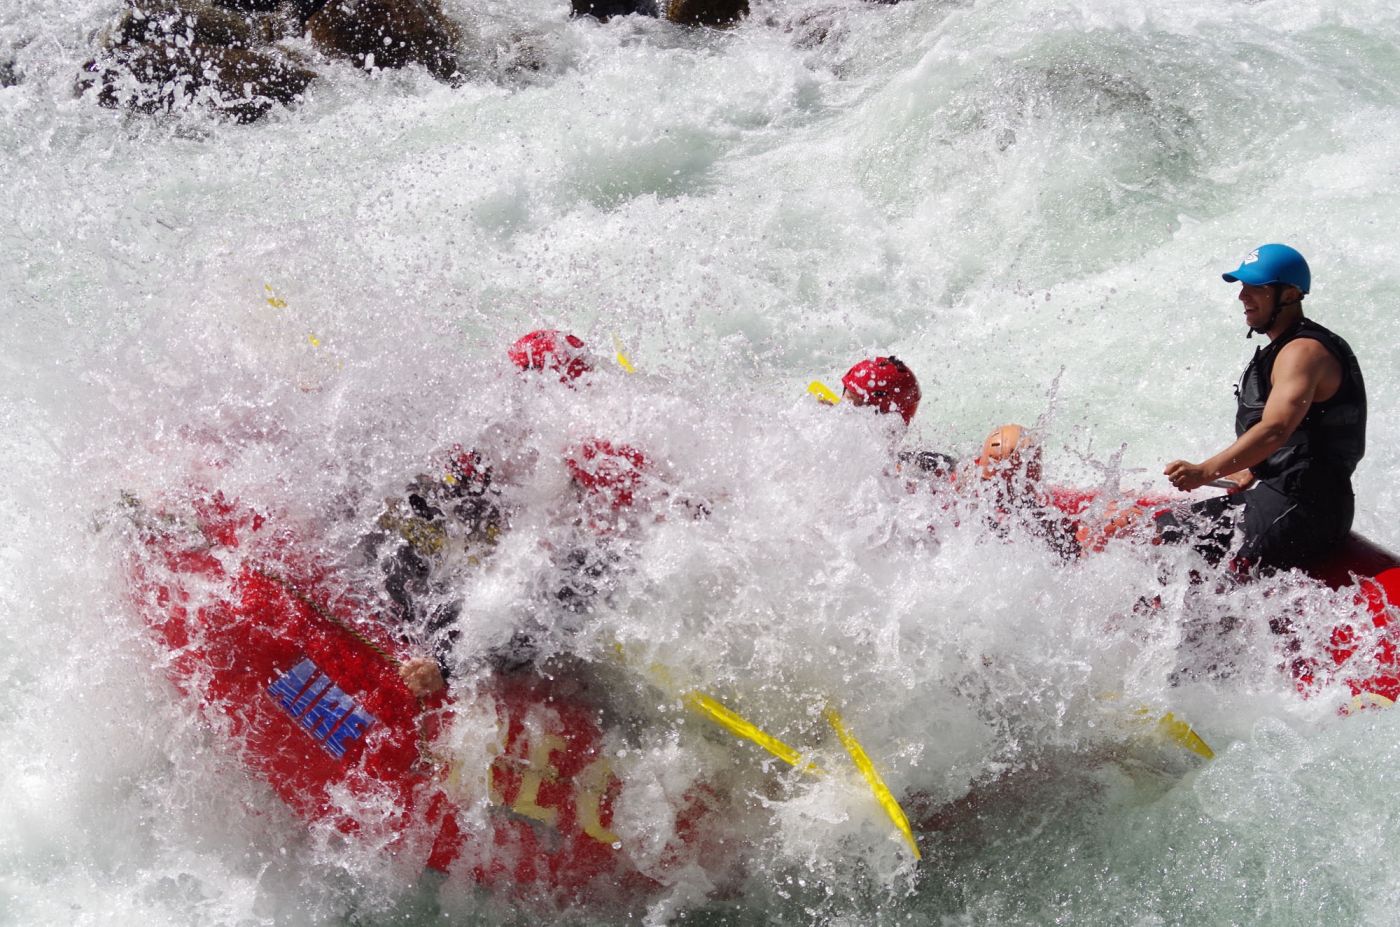 Whitewater Rafting for Beginners